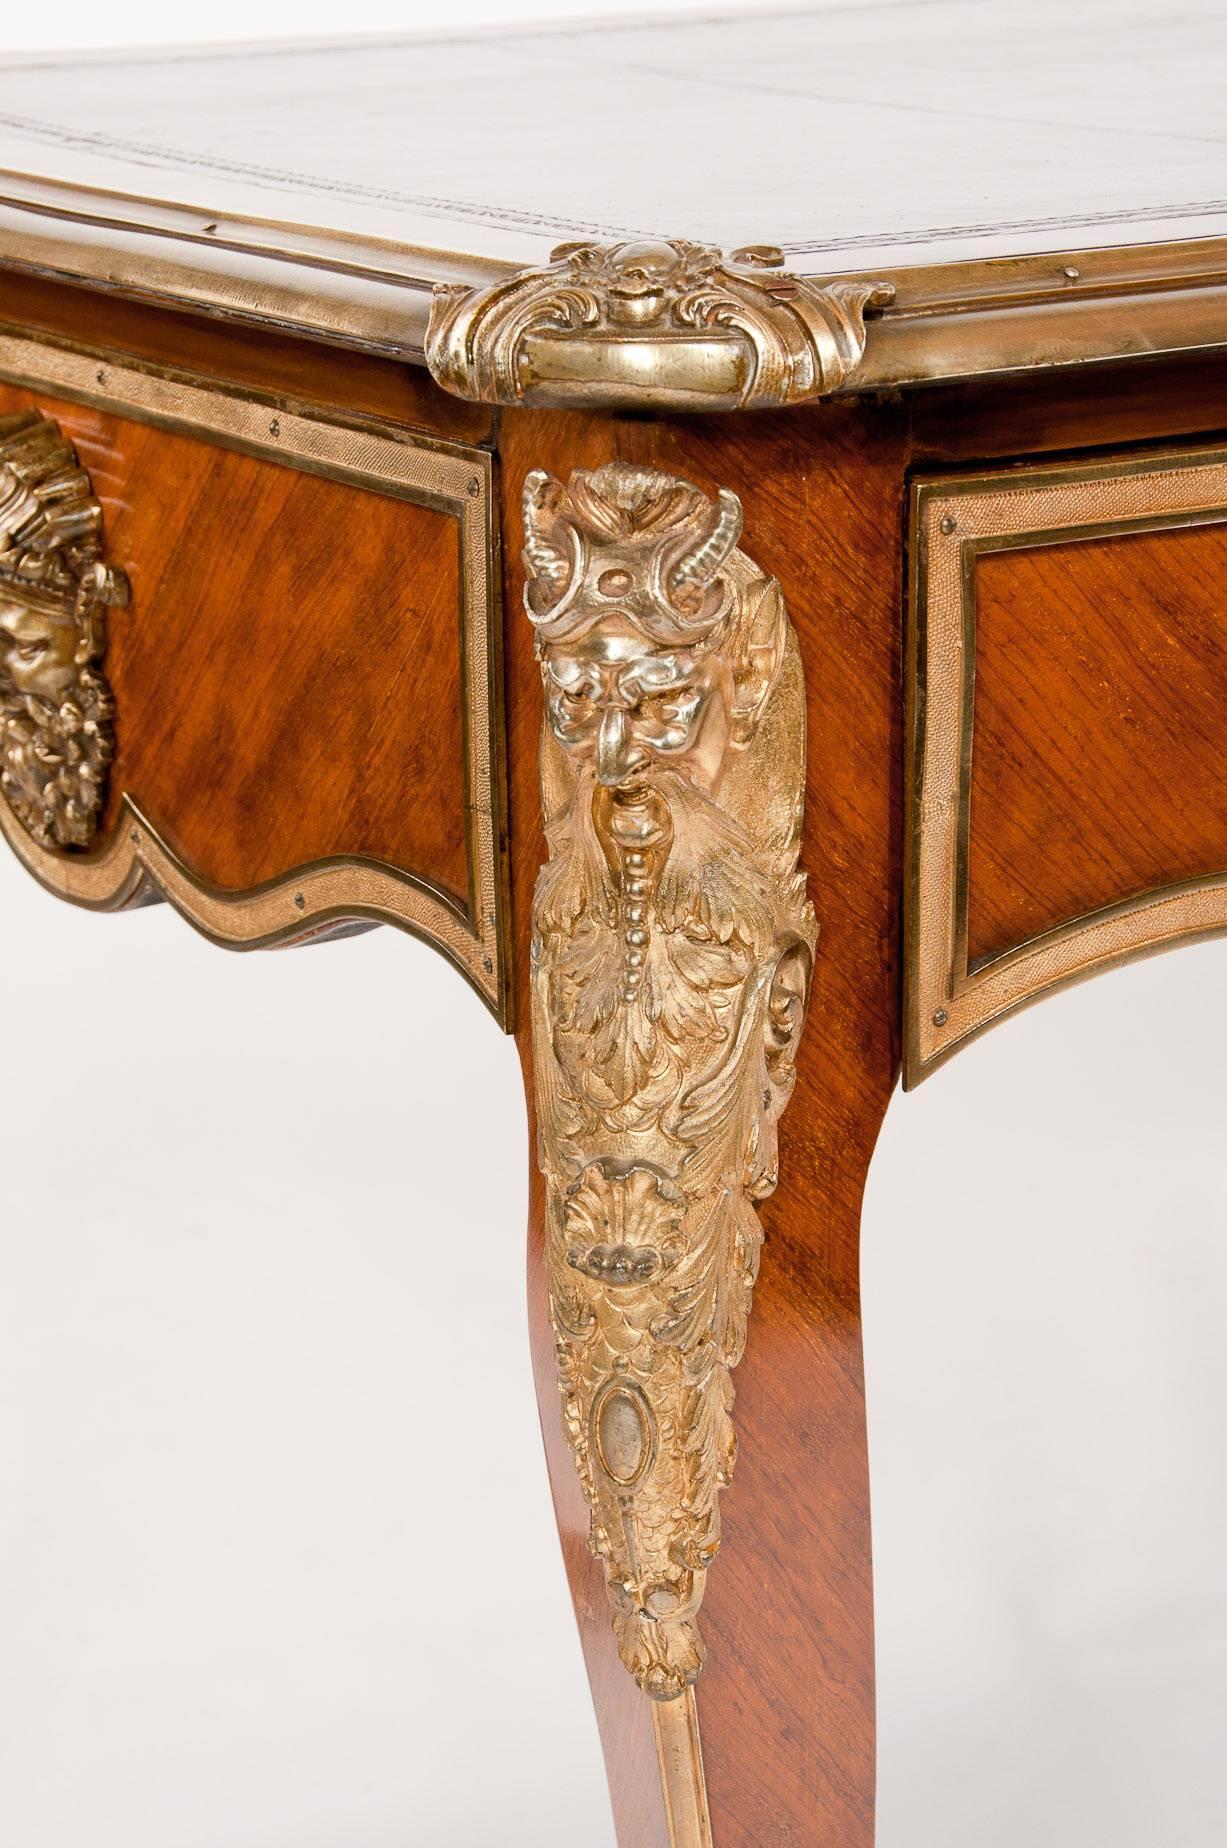 An exquisite 19th century French kingwood bureau plat with ormolu mounts and three drawers this exceptional quality bureau plat has been constructed in kingwood veneers and ormolu mounts to the finest standards and dating to circa 1870 retains it